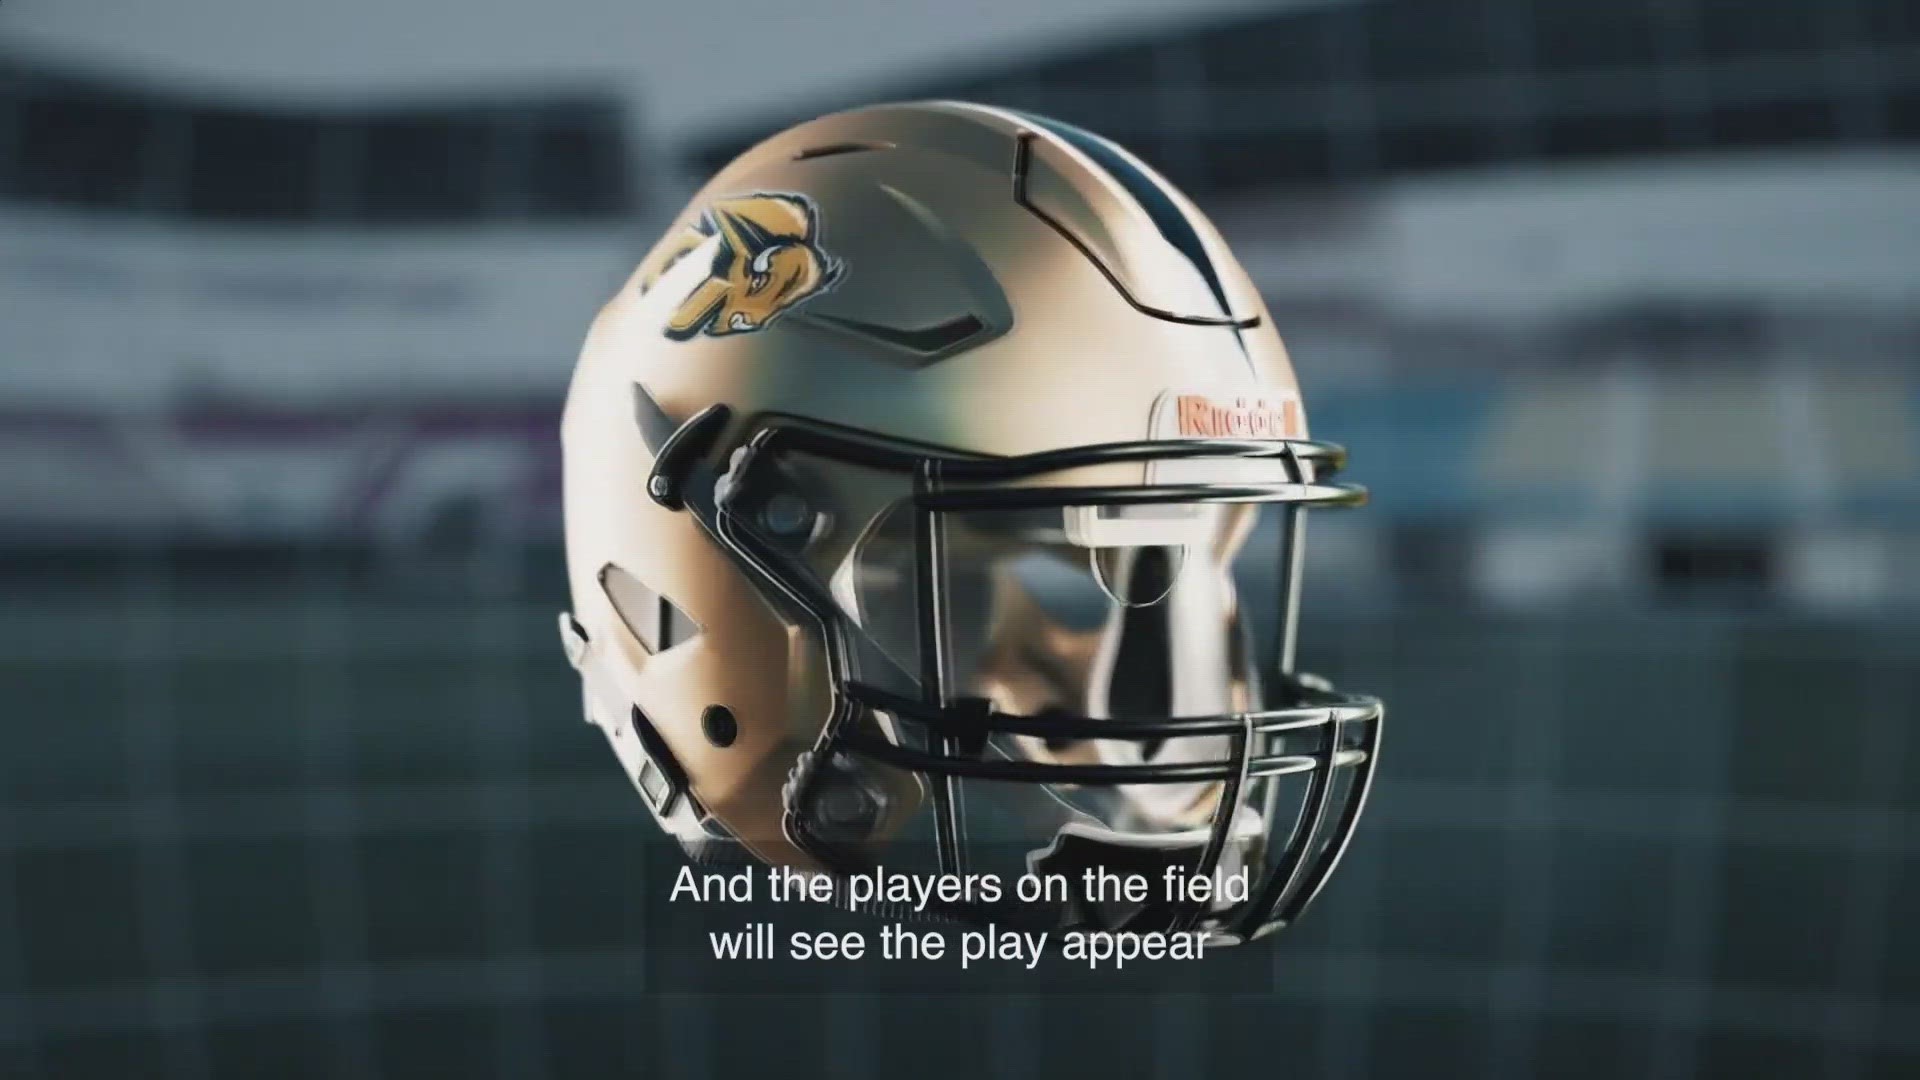 The new technology from AT&T will debut on the football field at Gallaudet University during homecoming weekend